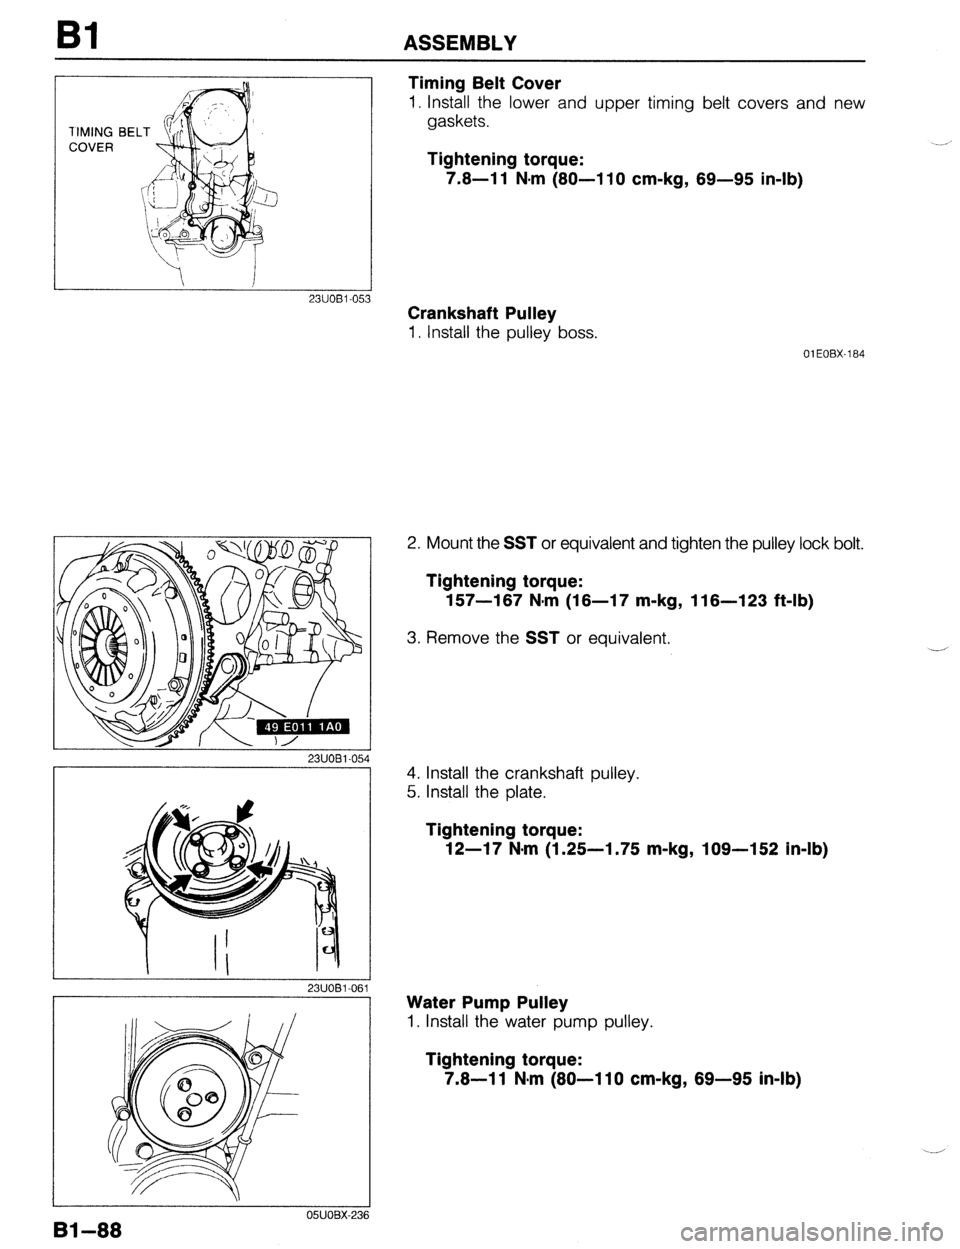 MAZDA PROTEGE 1992  Workshop Manual Bl ASSEMBLY 
1IMING 
COVER 
Timing Belt Cover 
1. Install the lower and upper timing belt covers and new 
gaskets. 
Tightening torque: 
7.8-l 1 N-m (80-l 10 cm-kg, 69-95 in-lb) 
Crankshaft Pulley 
1. 